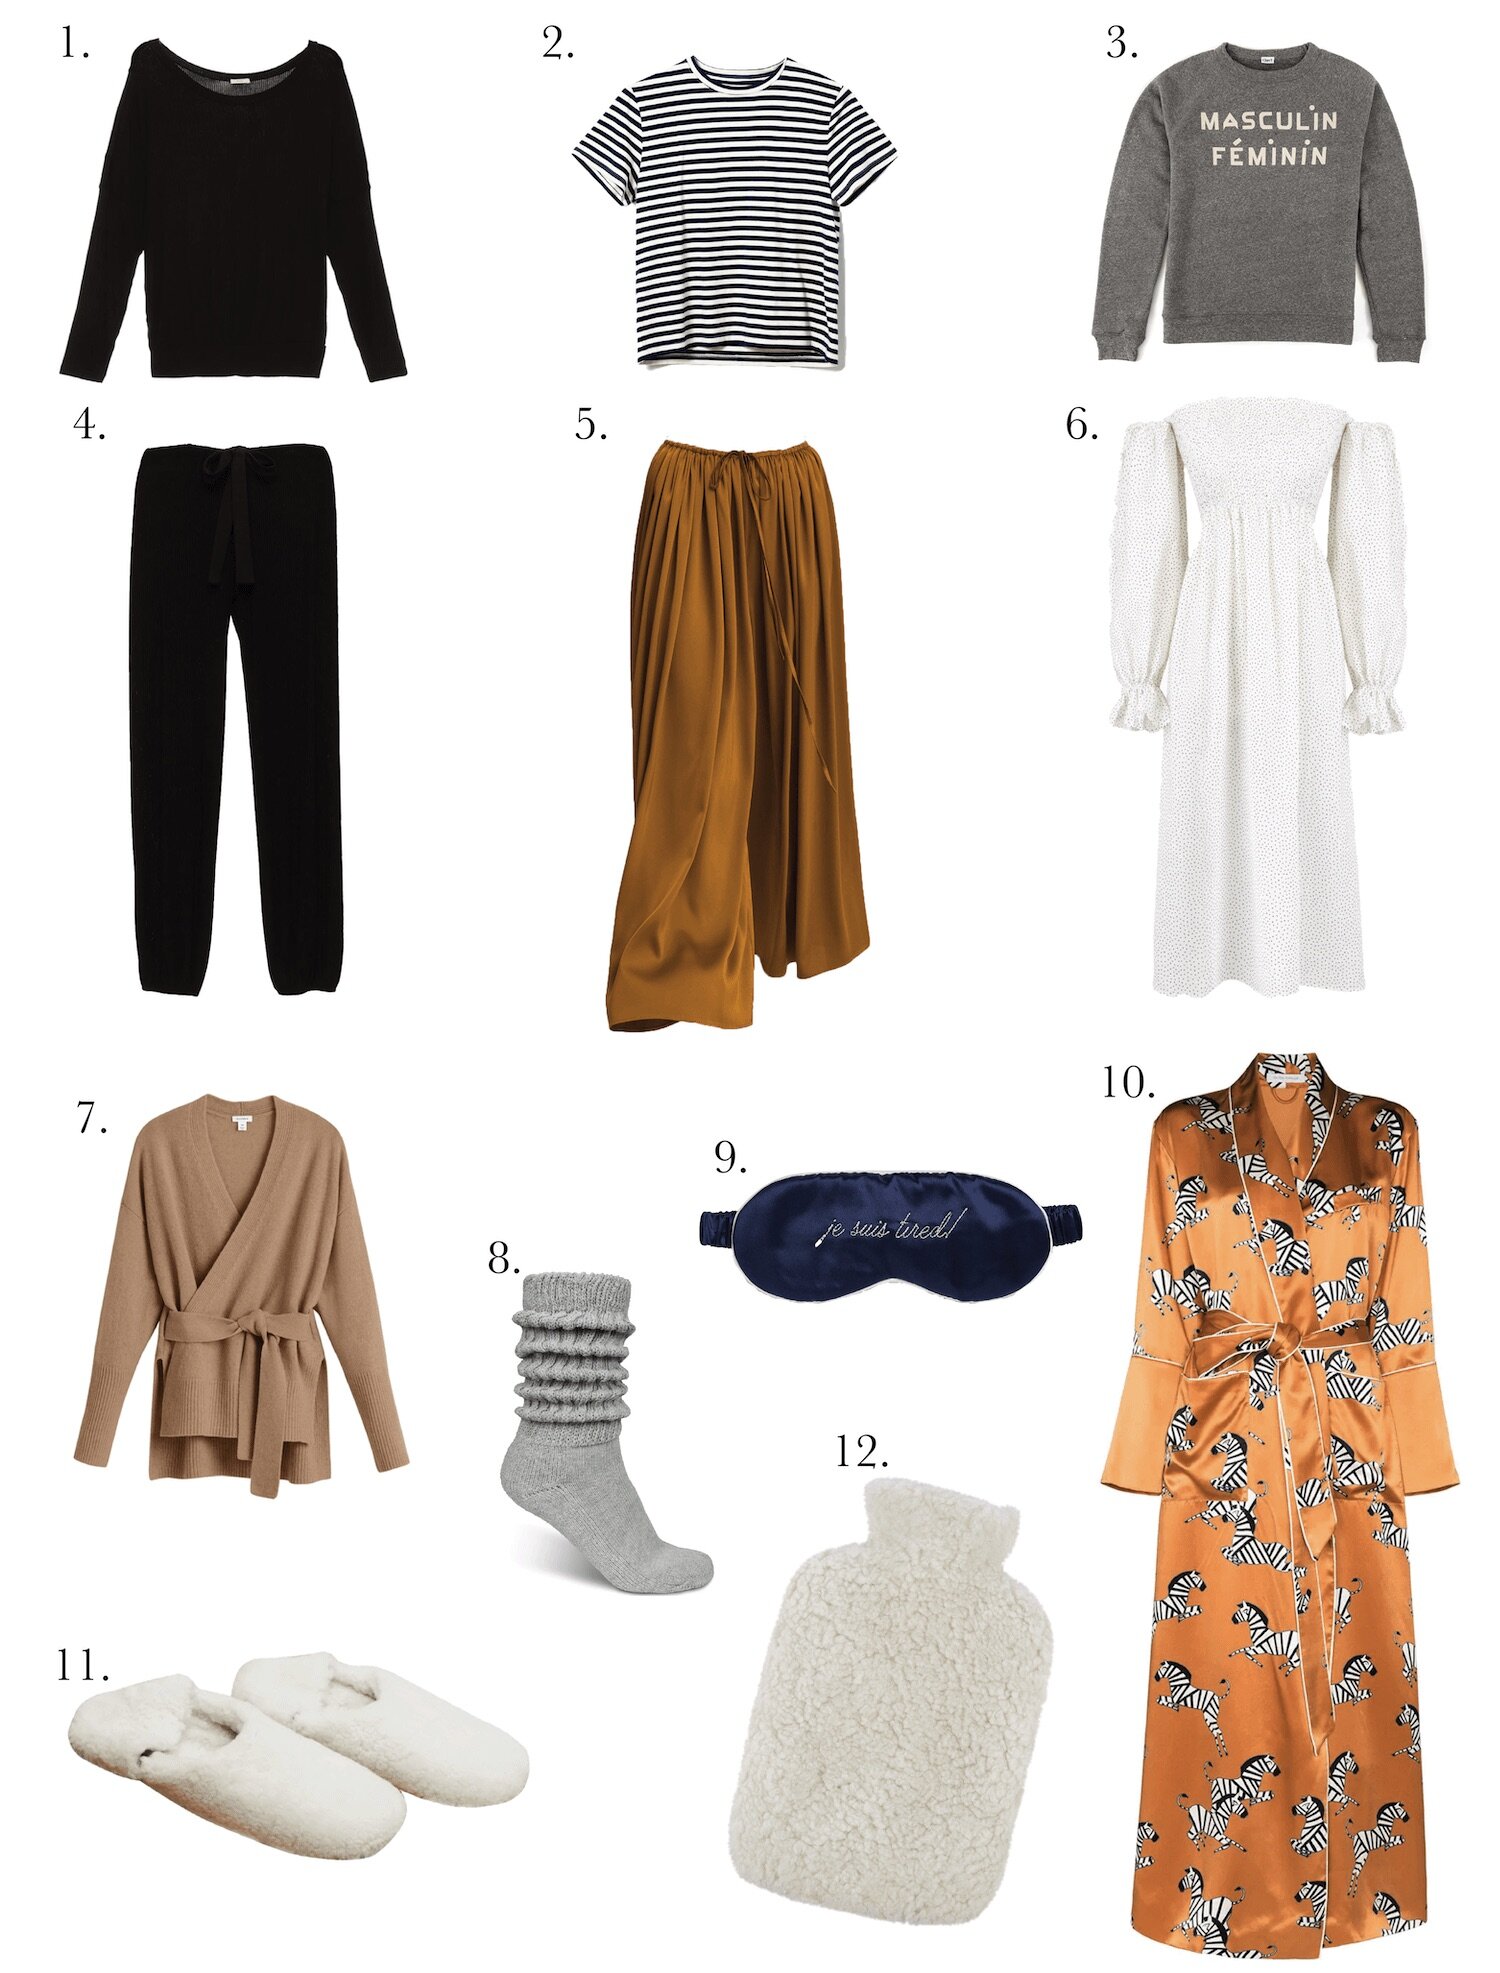 How to Create a Lounge Capsule Wardrobe You’ll Love | Use this cozy capsule wardrobe and my free guide to design your own loungewear collection that keeps you feeling both comfortable and chic at home.